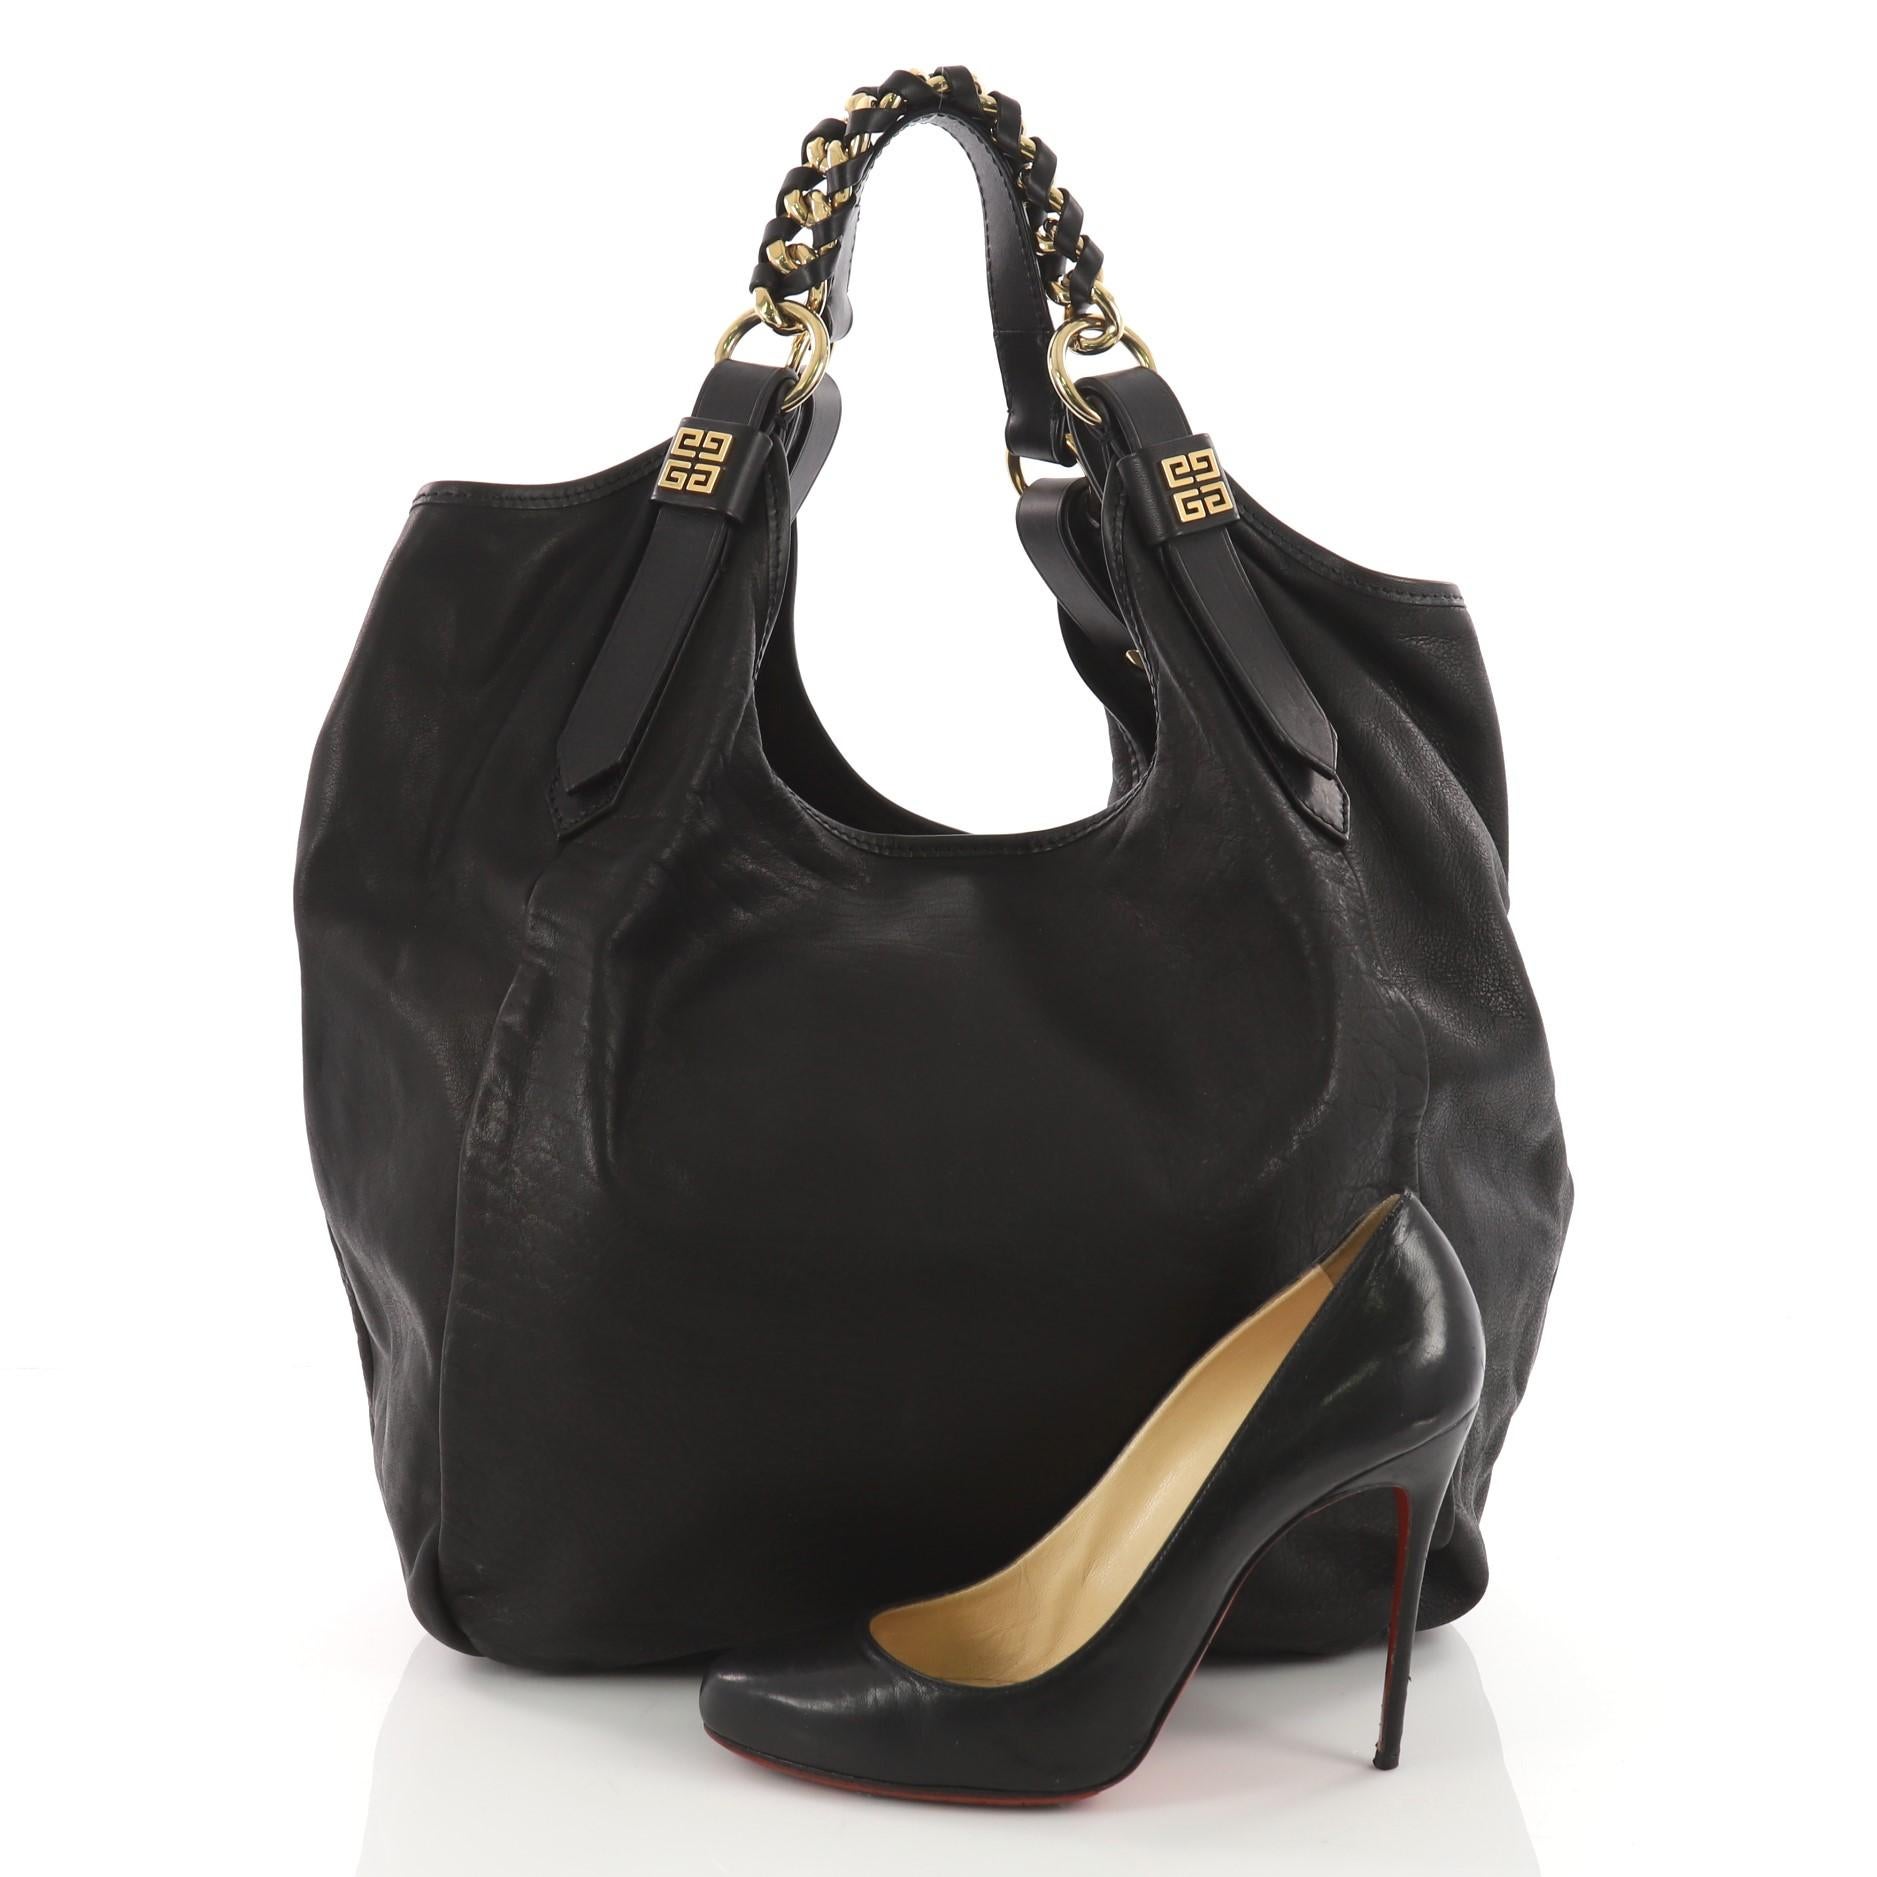 This authentic Givenchy Sacca Shoulder Bag Leather Medium is modern yet casual in design ideal for day to day use. Crafted in black leather, this edgy bag features chain and leather handles with gold Givenchy button accents. Its magnetic snap